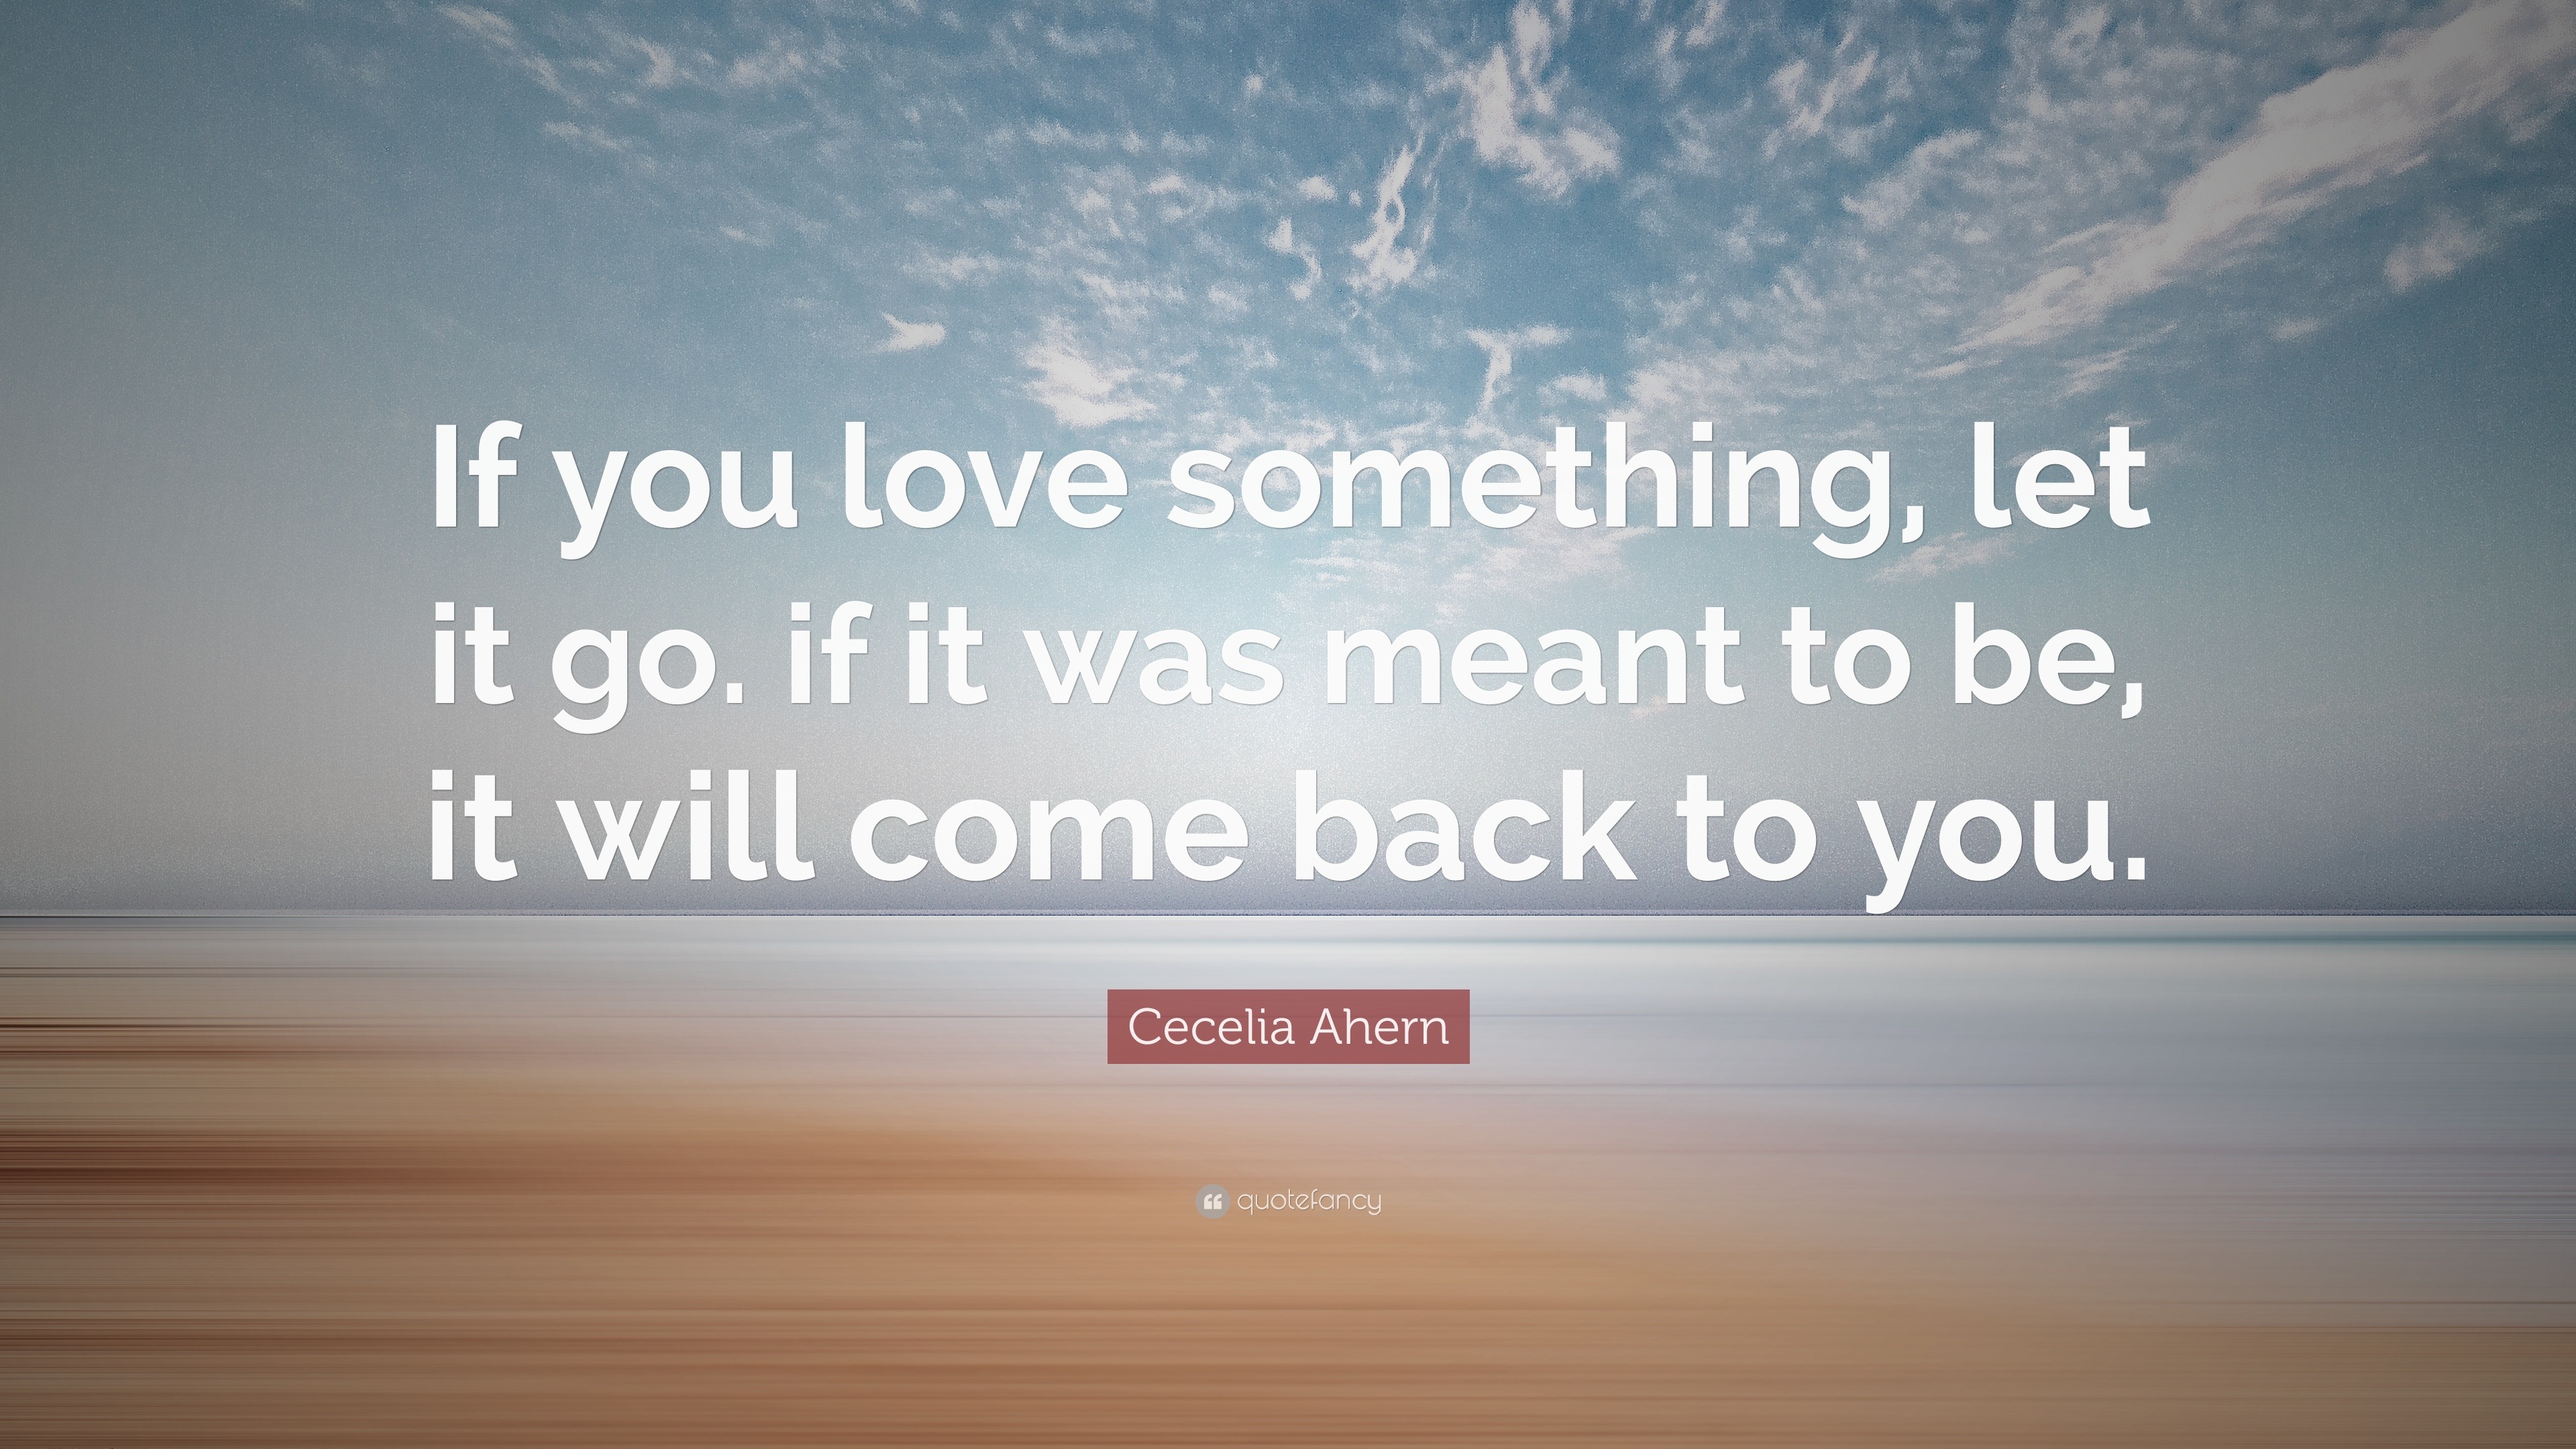 Cecelia Ahern Quote: "If you love something, let it go. if it was meant to be, it will come back ...